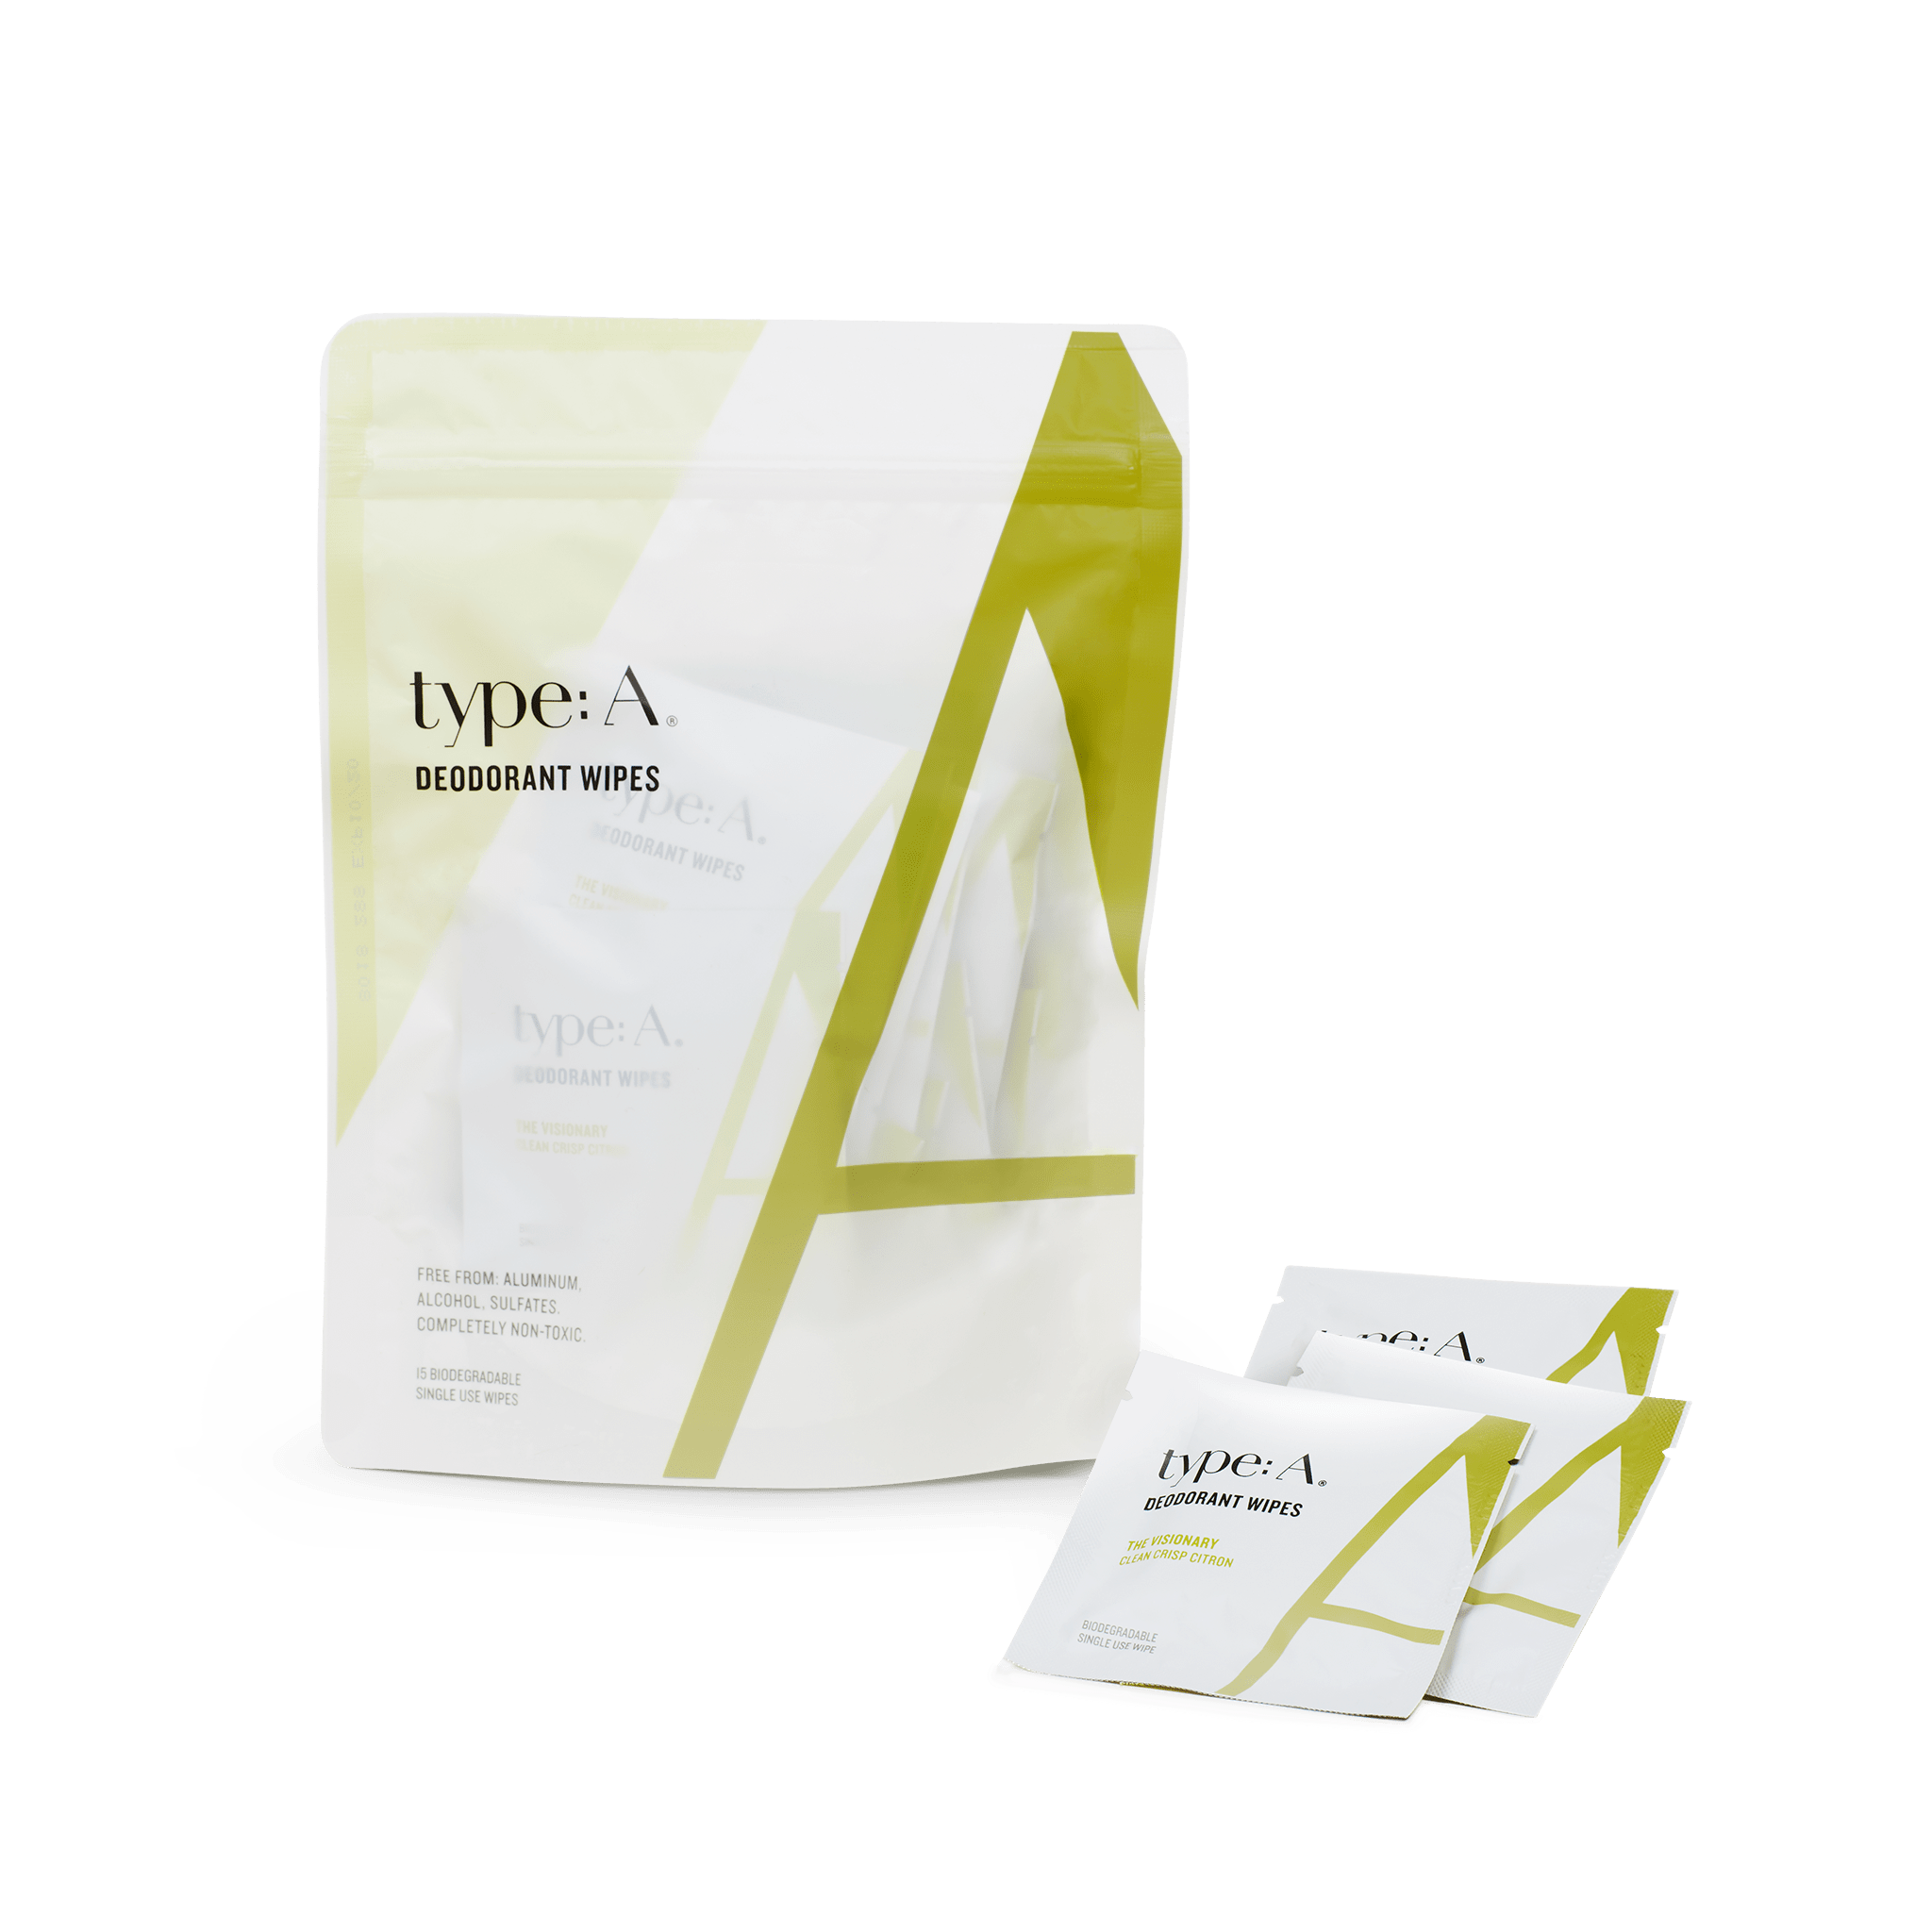 type: A Deodorant Wipes – Elements Nature